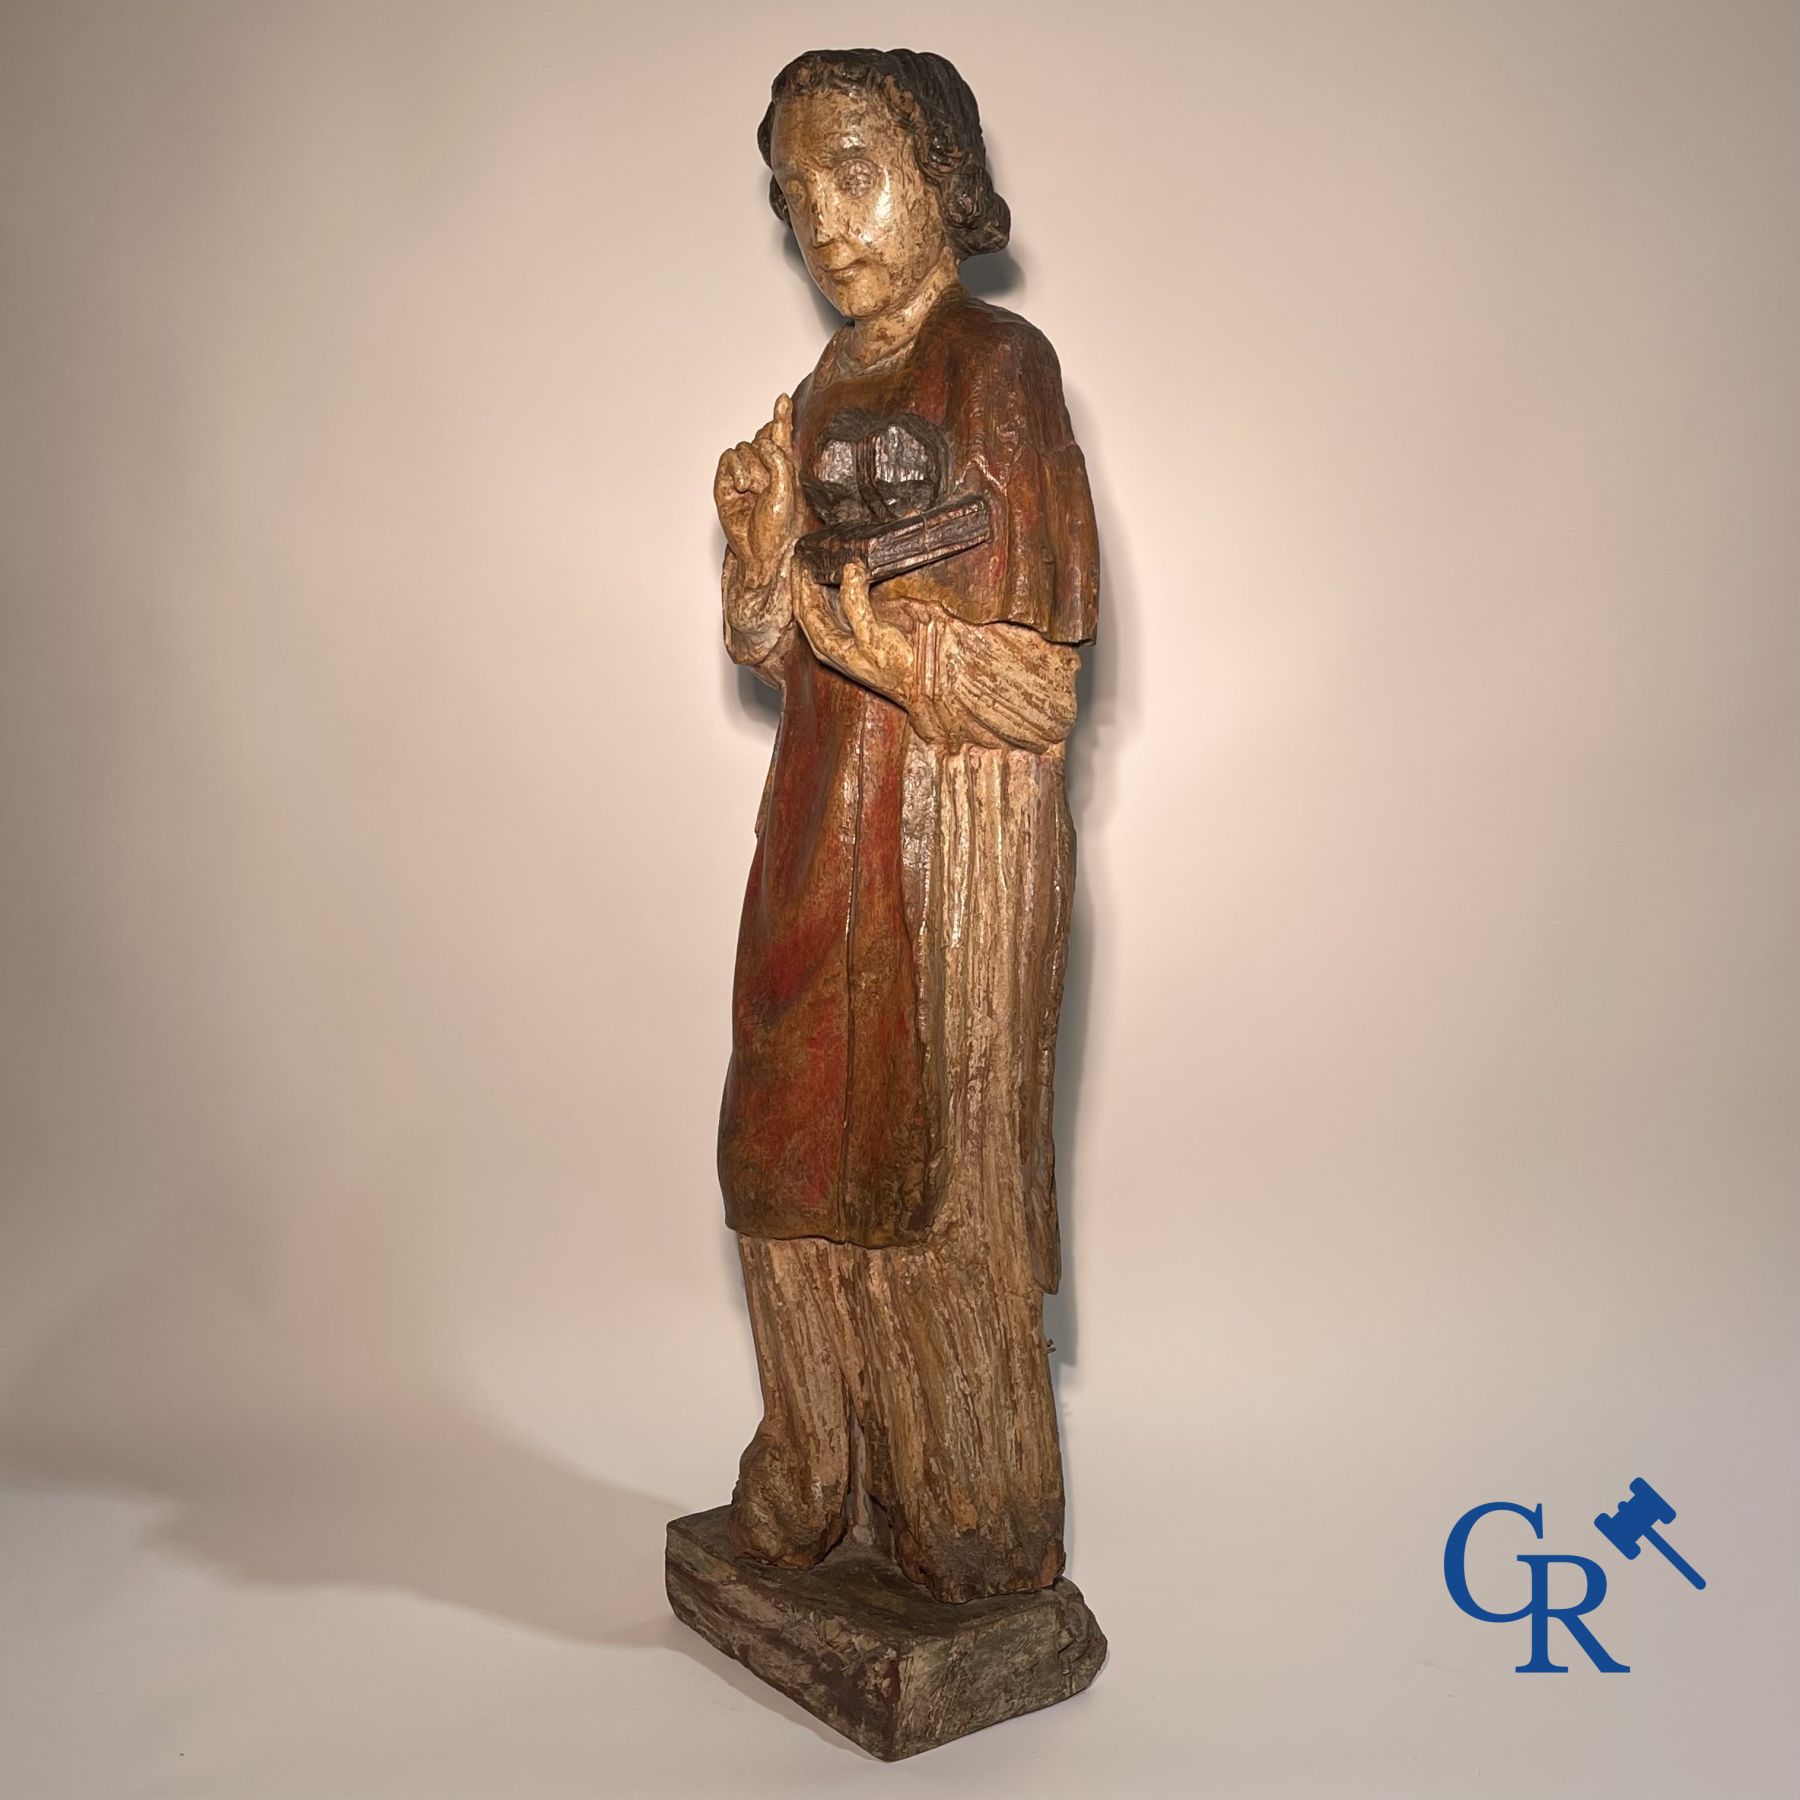 Wooden sculpture: Polychrome wood sculpture of a saint. Saint Stephen. Probably 17th century. - Image 15 of 26